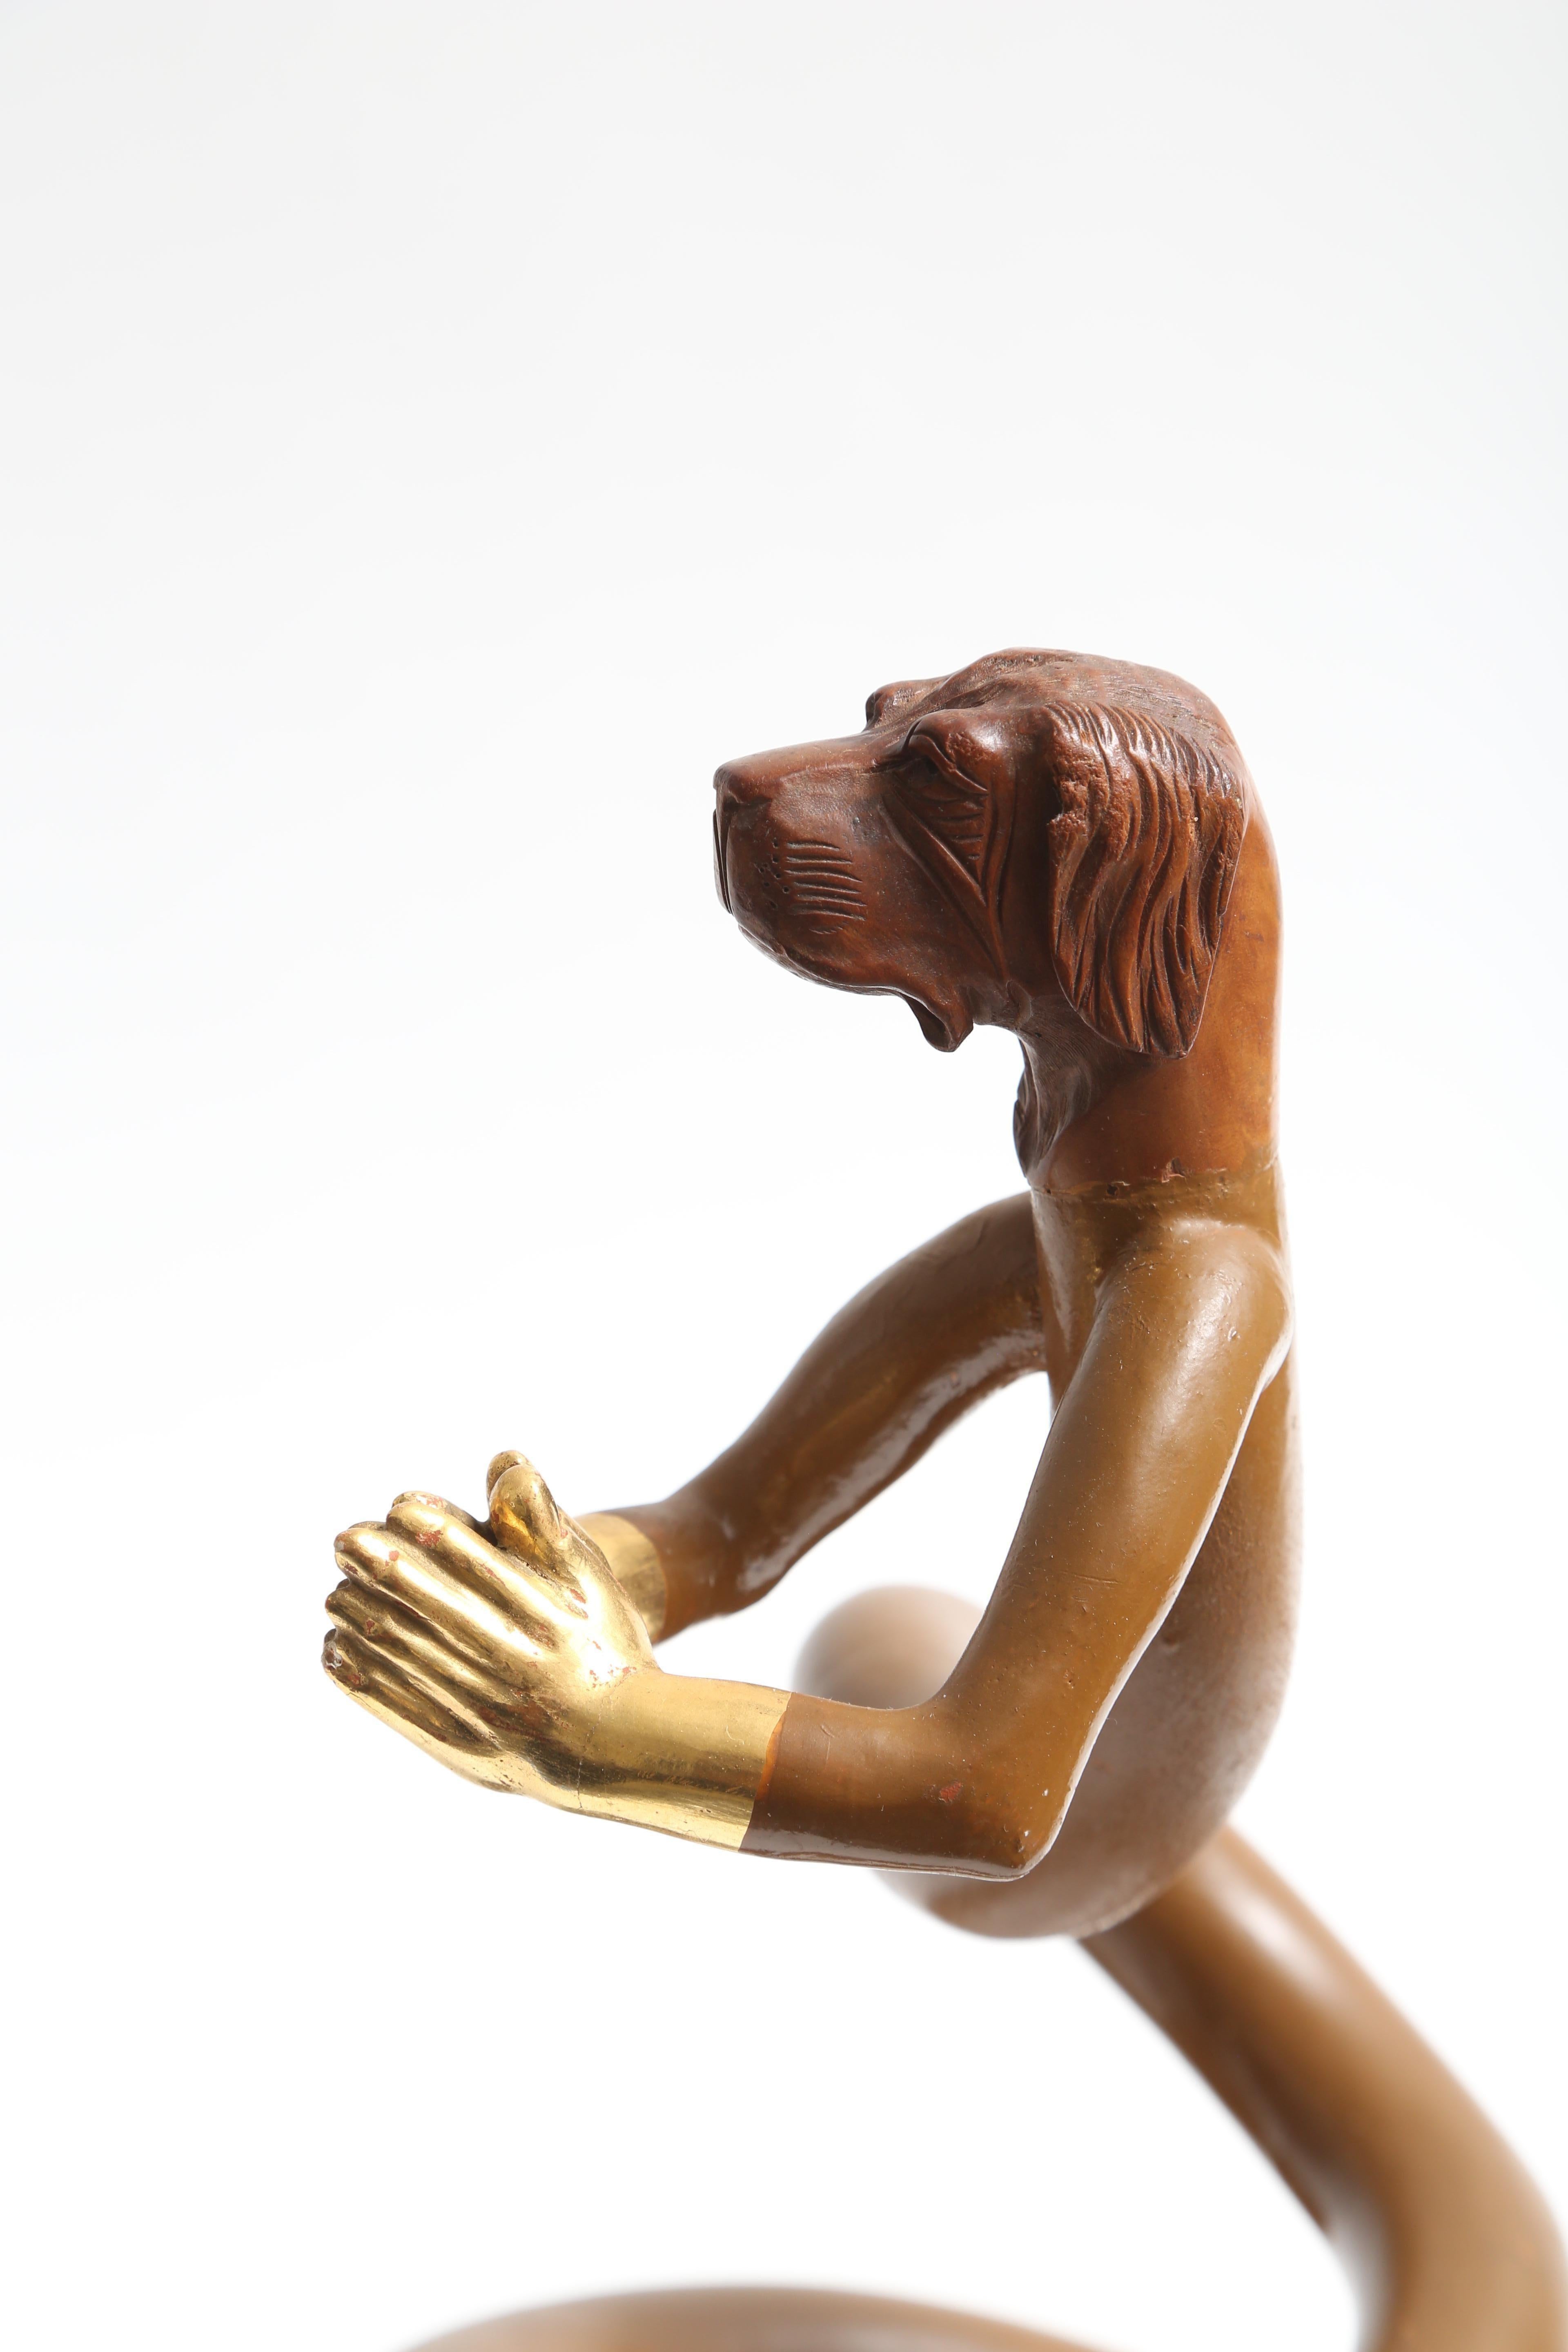 Wood Pedro Friedeberg Sculpture Closed Hands For Sale